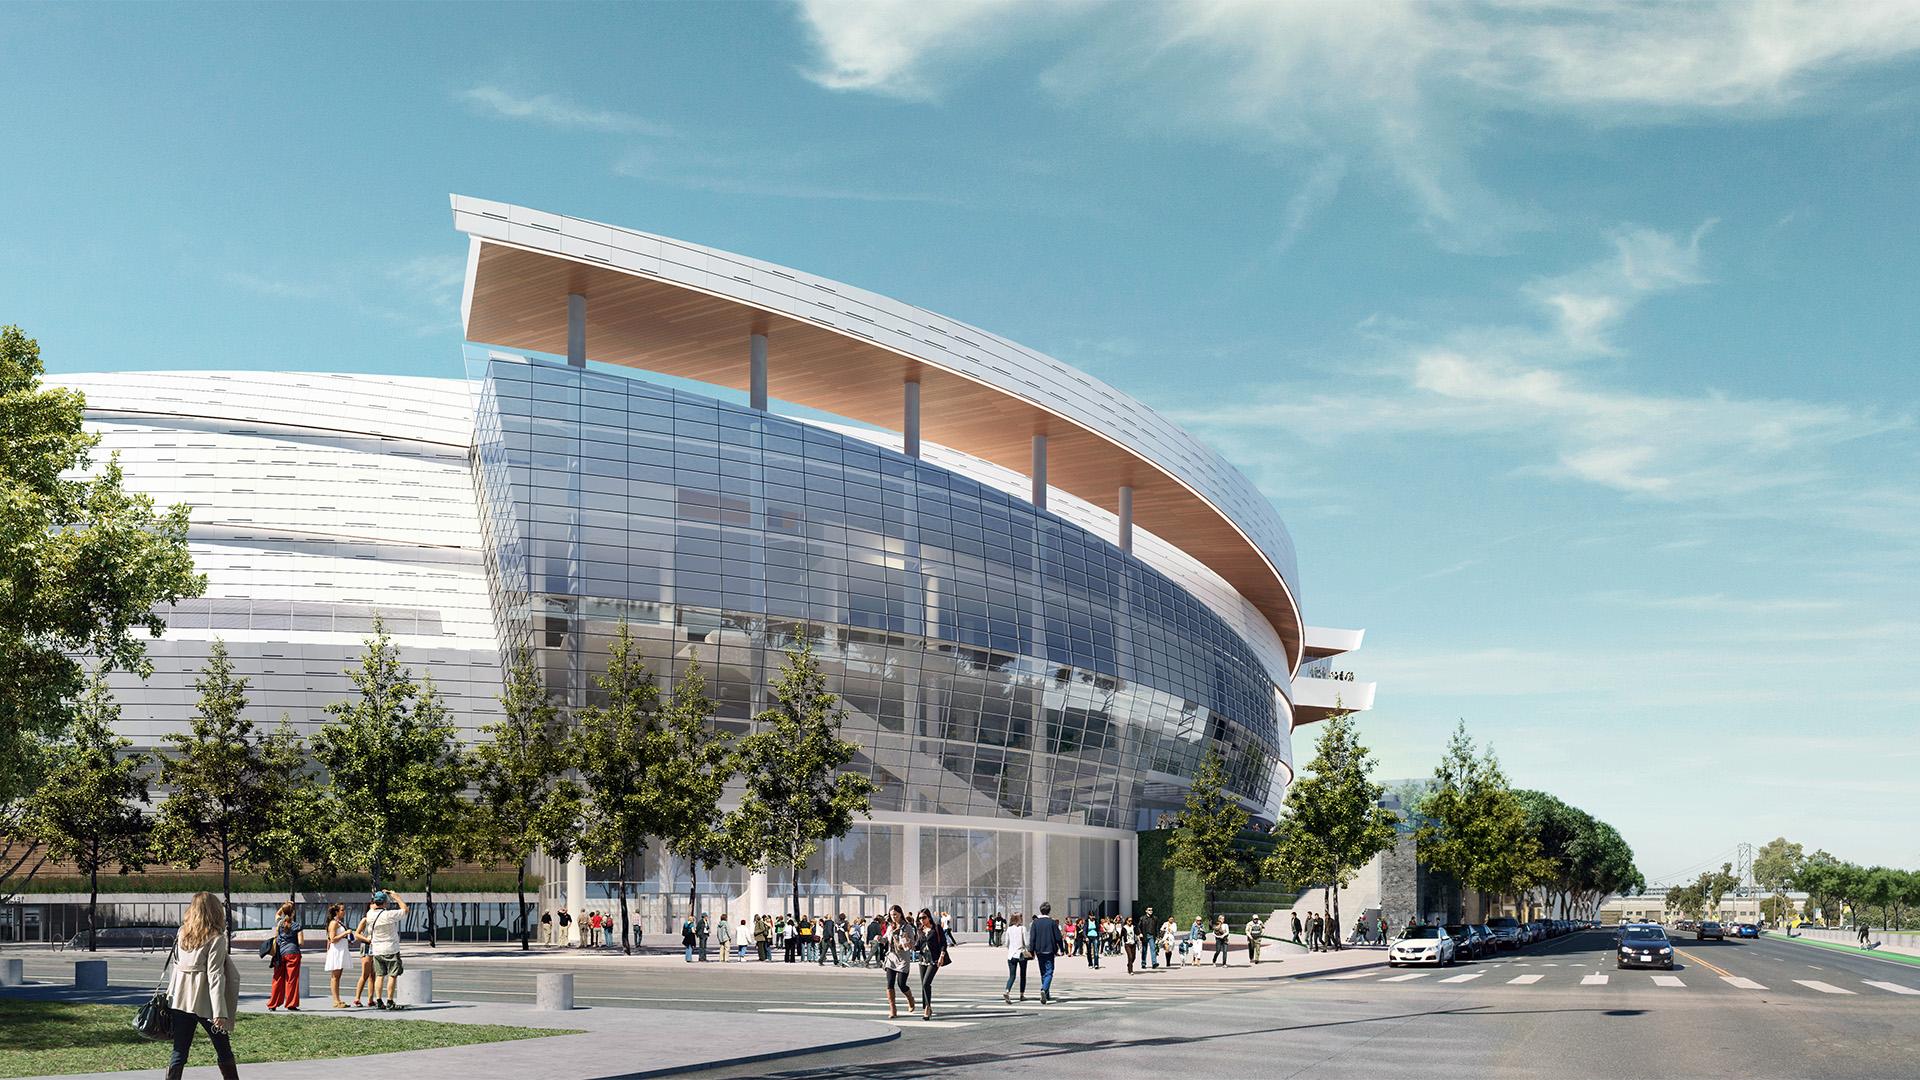 things fans will love about Golden State Warriors new arena